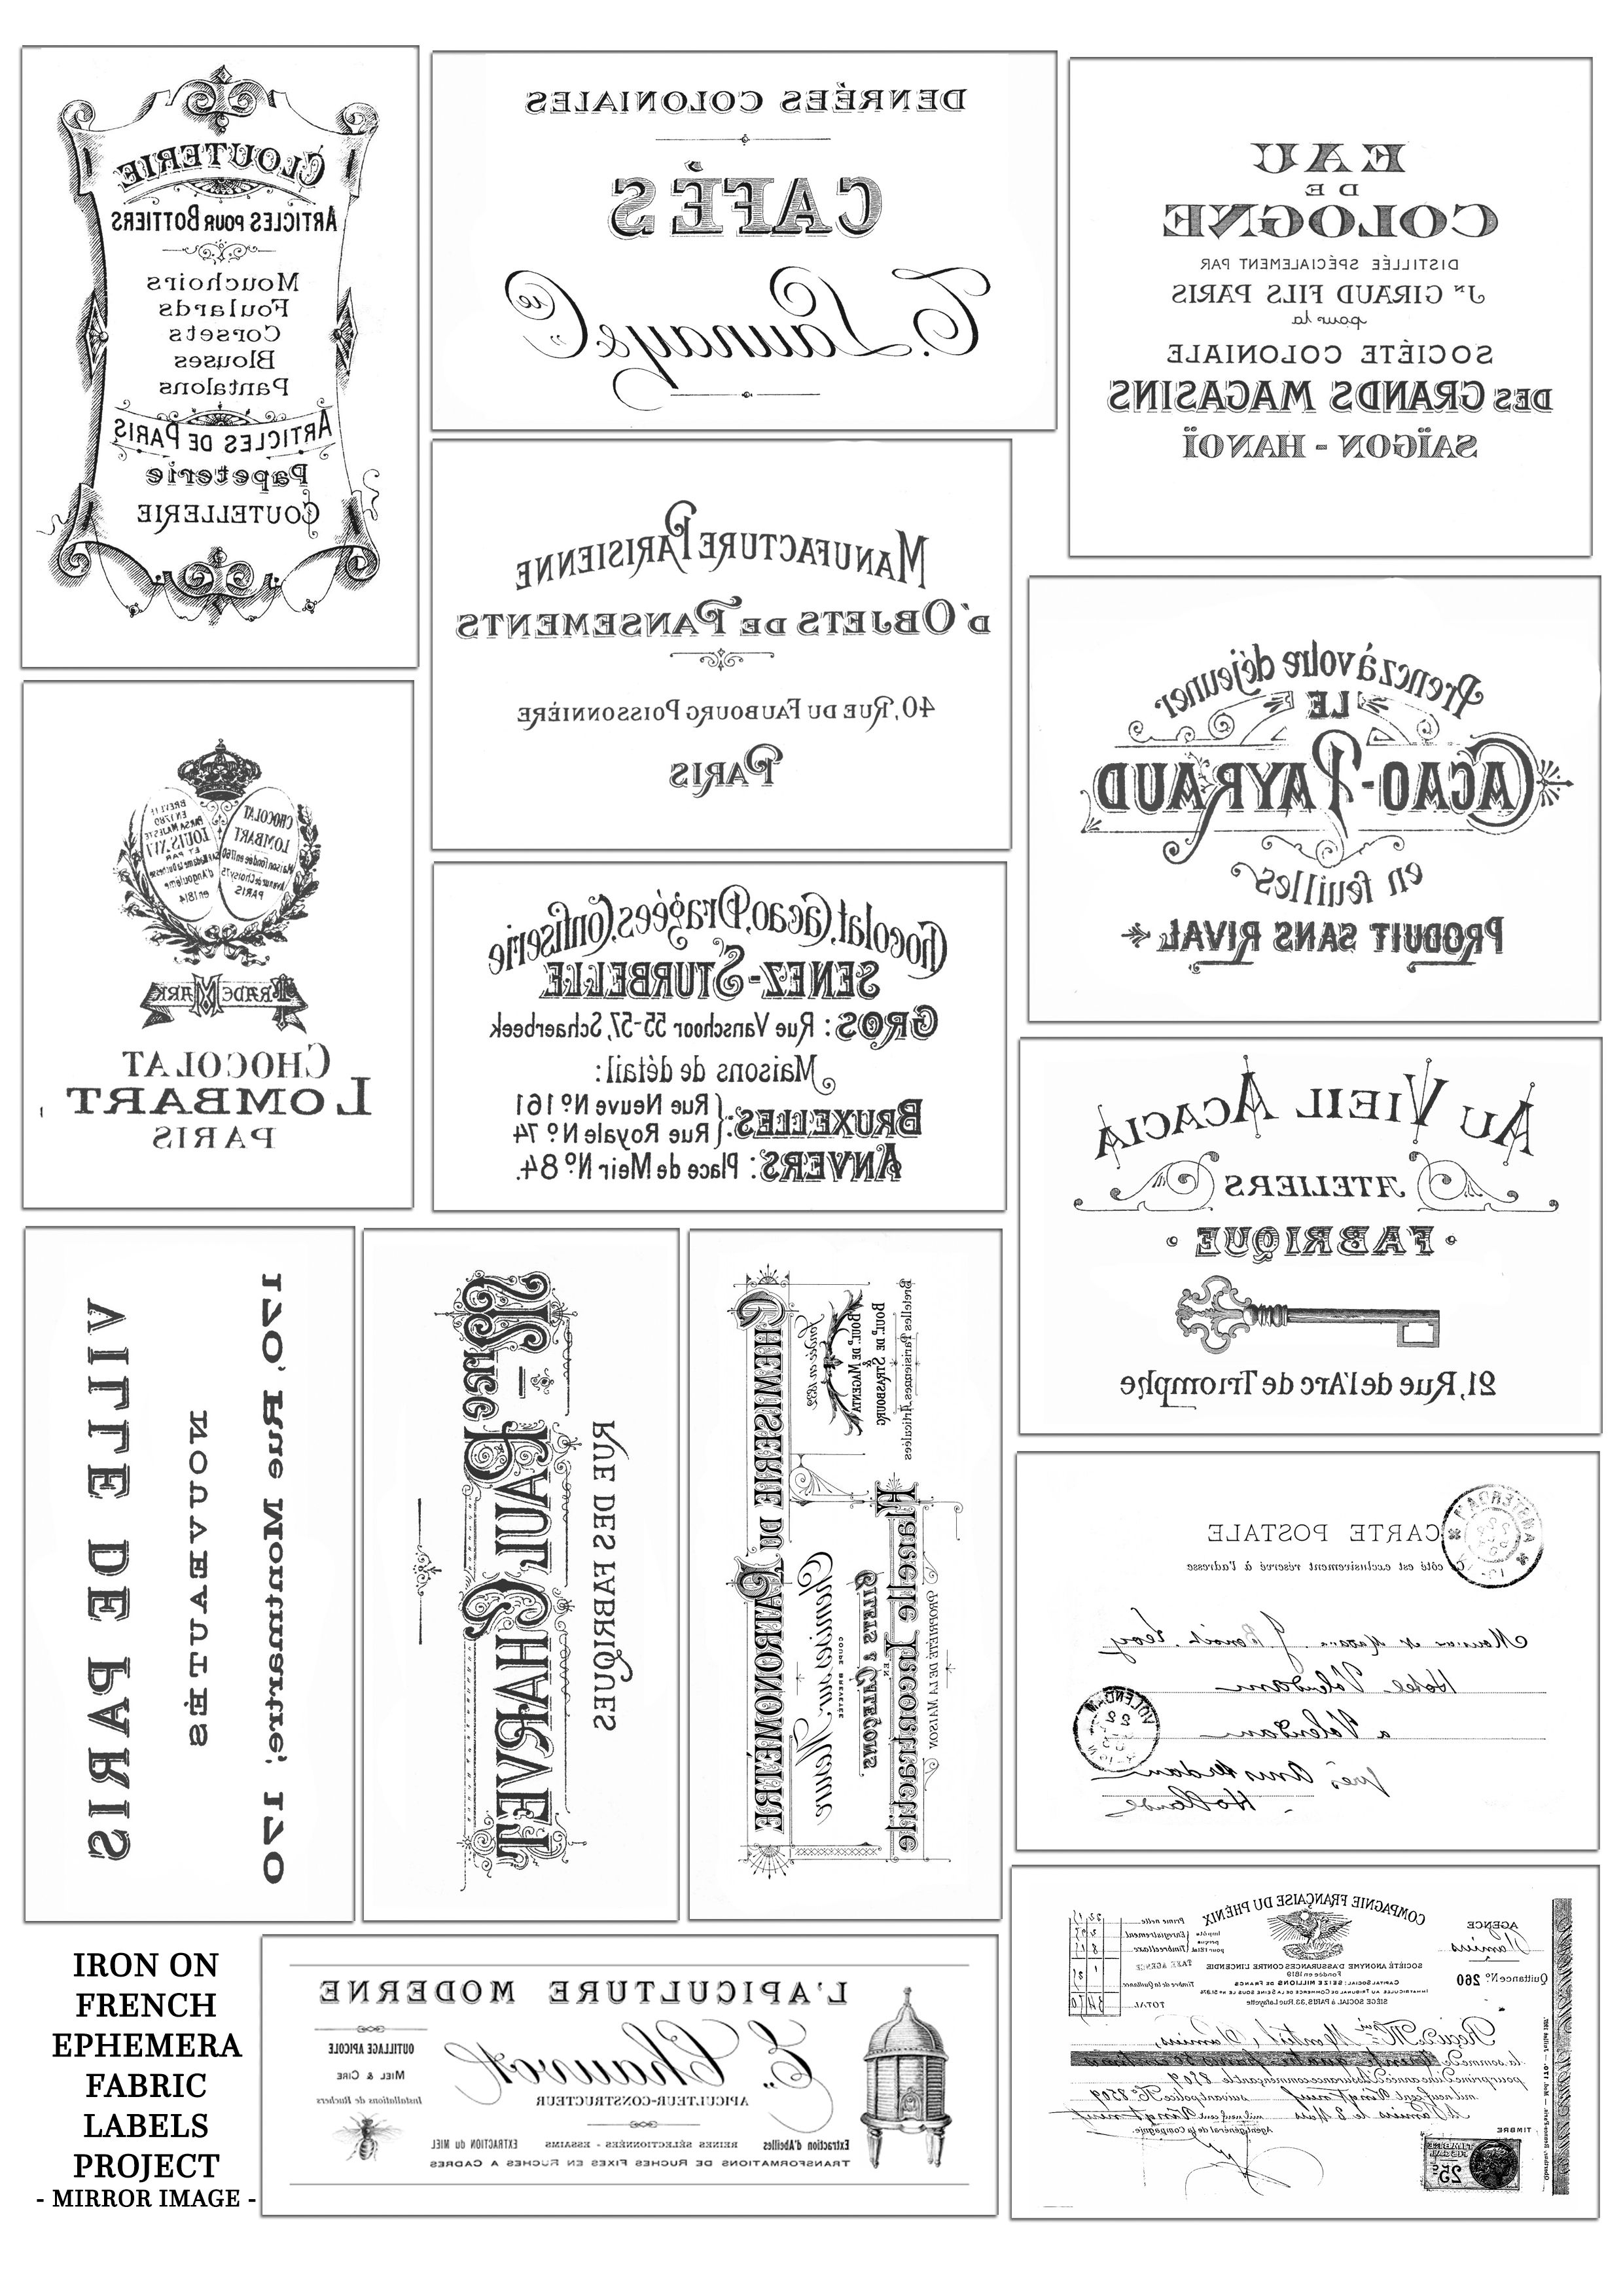 French Ephemera Fabric Labels Or Tags – Mirror Image | Pictures - Free Printable Mirrored Numbers